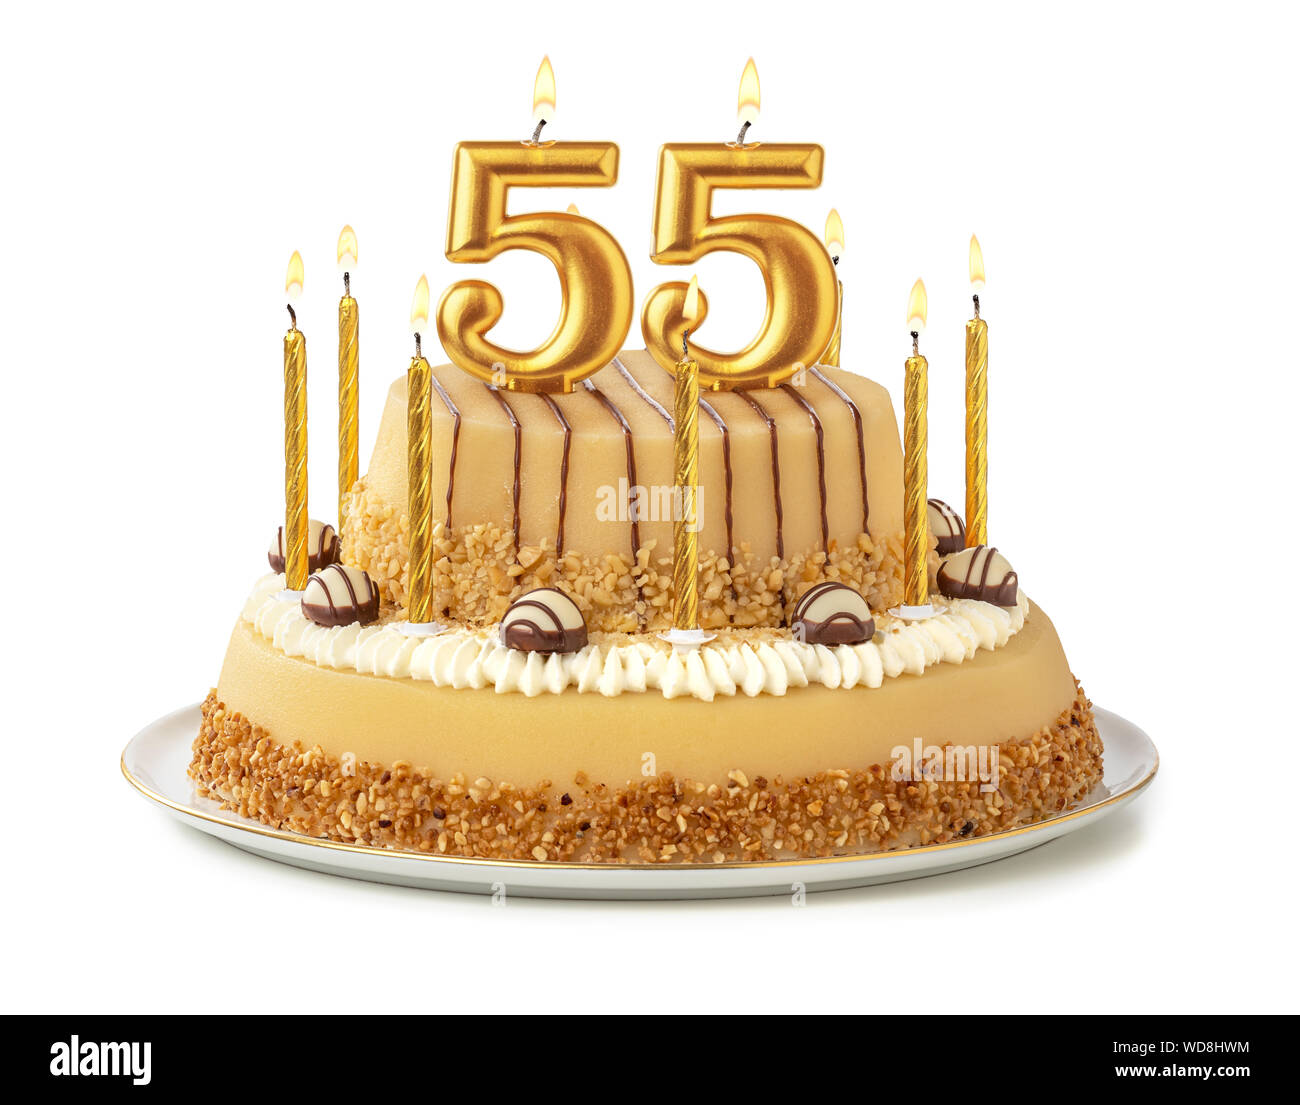 Birthday Cake Candles Number 55 Banque D Image Et Photos Alamy